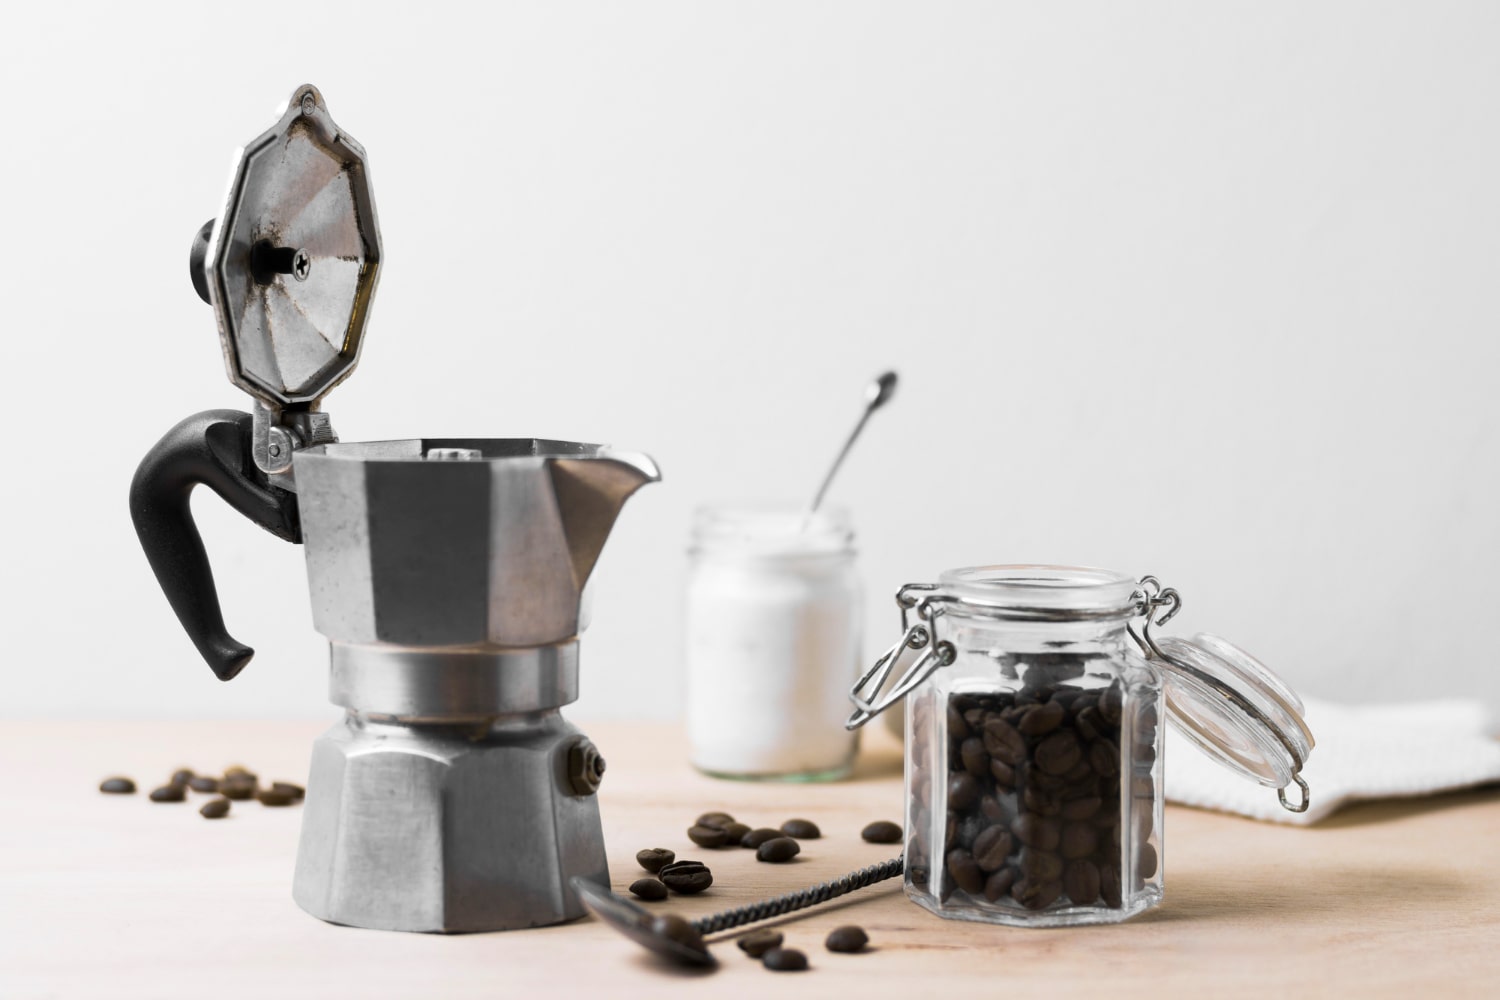 Espresso pot and beans, ideal for Valentine's gift